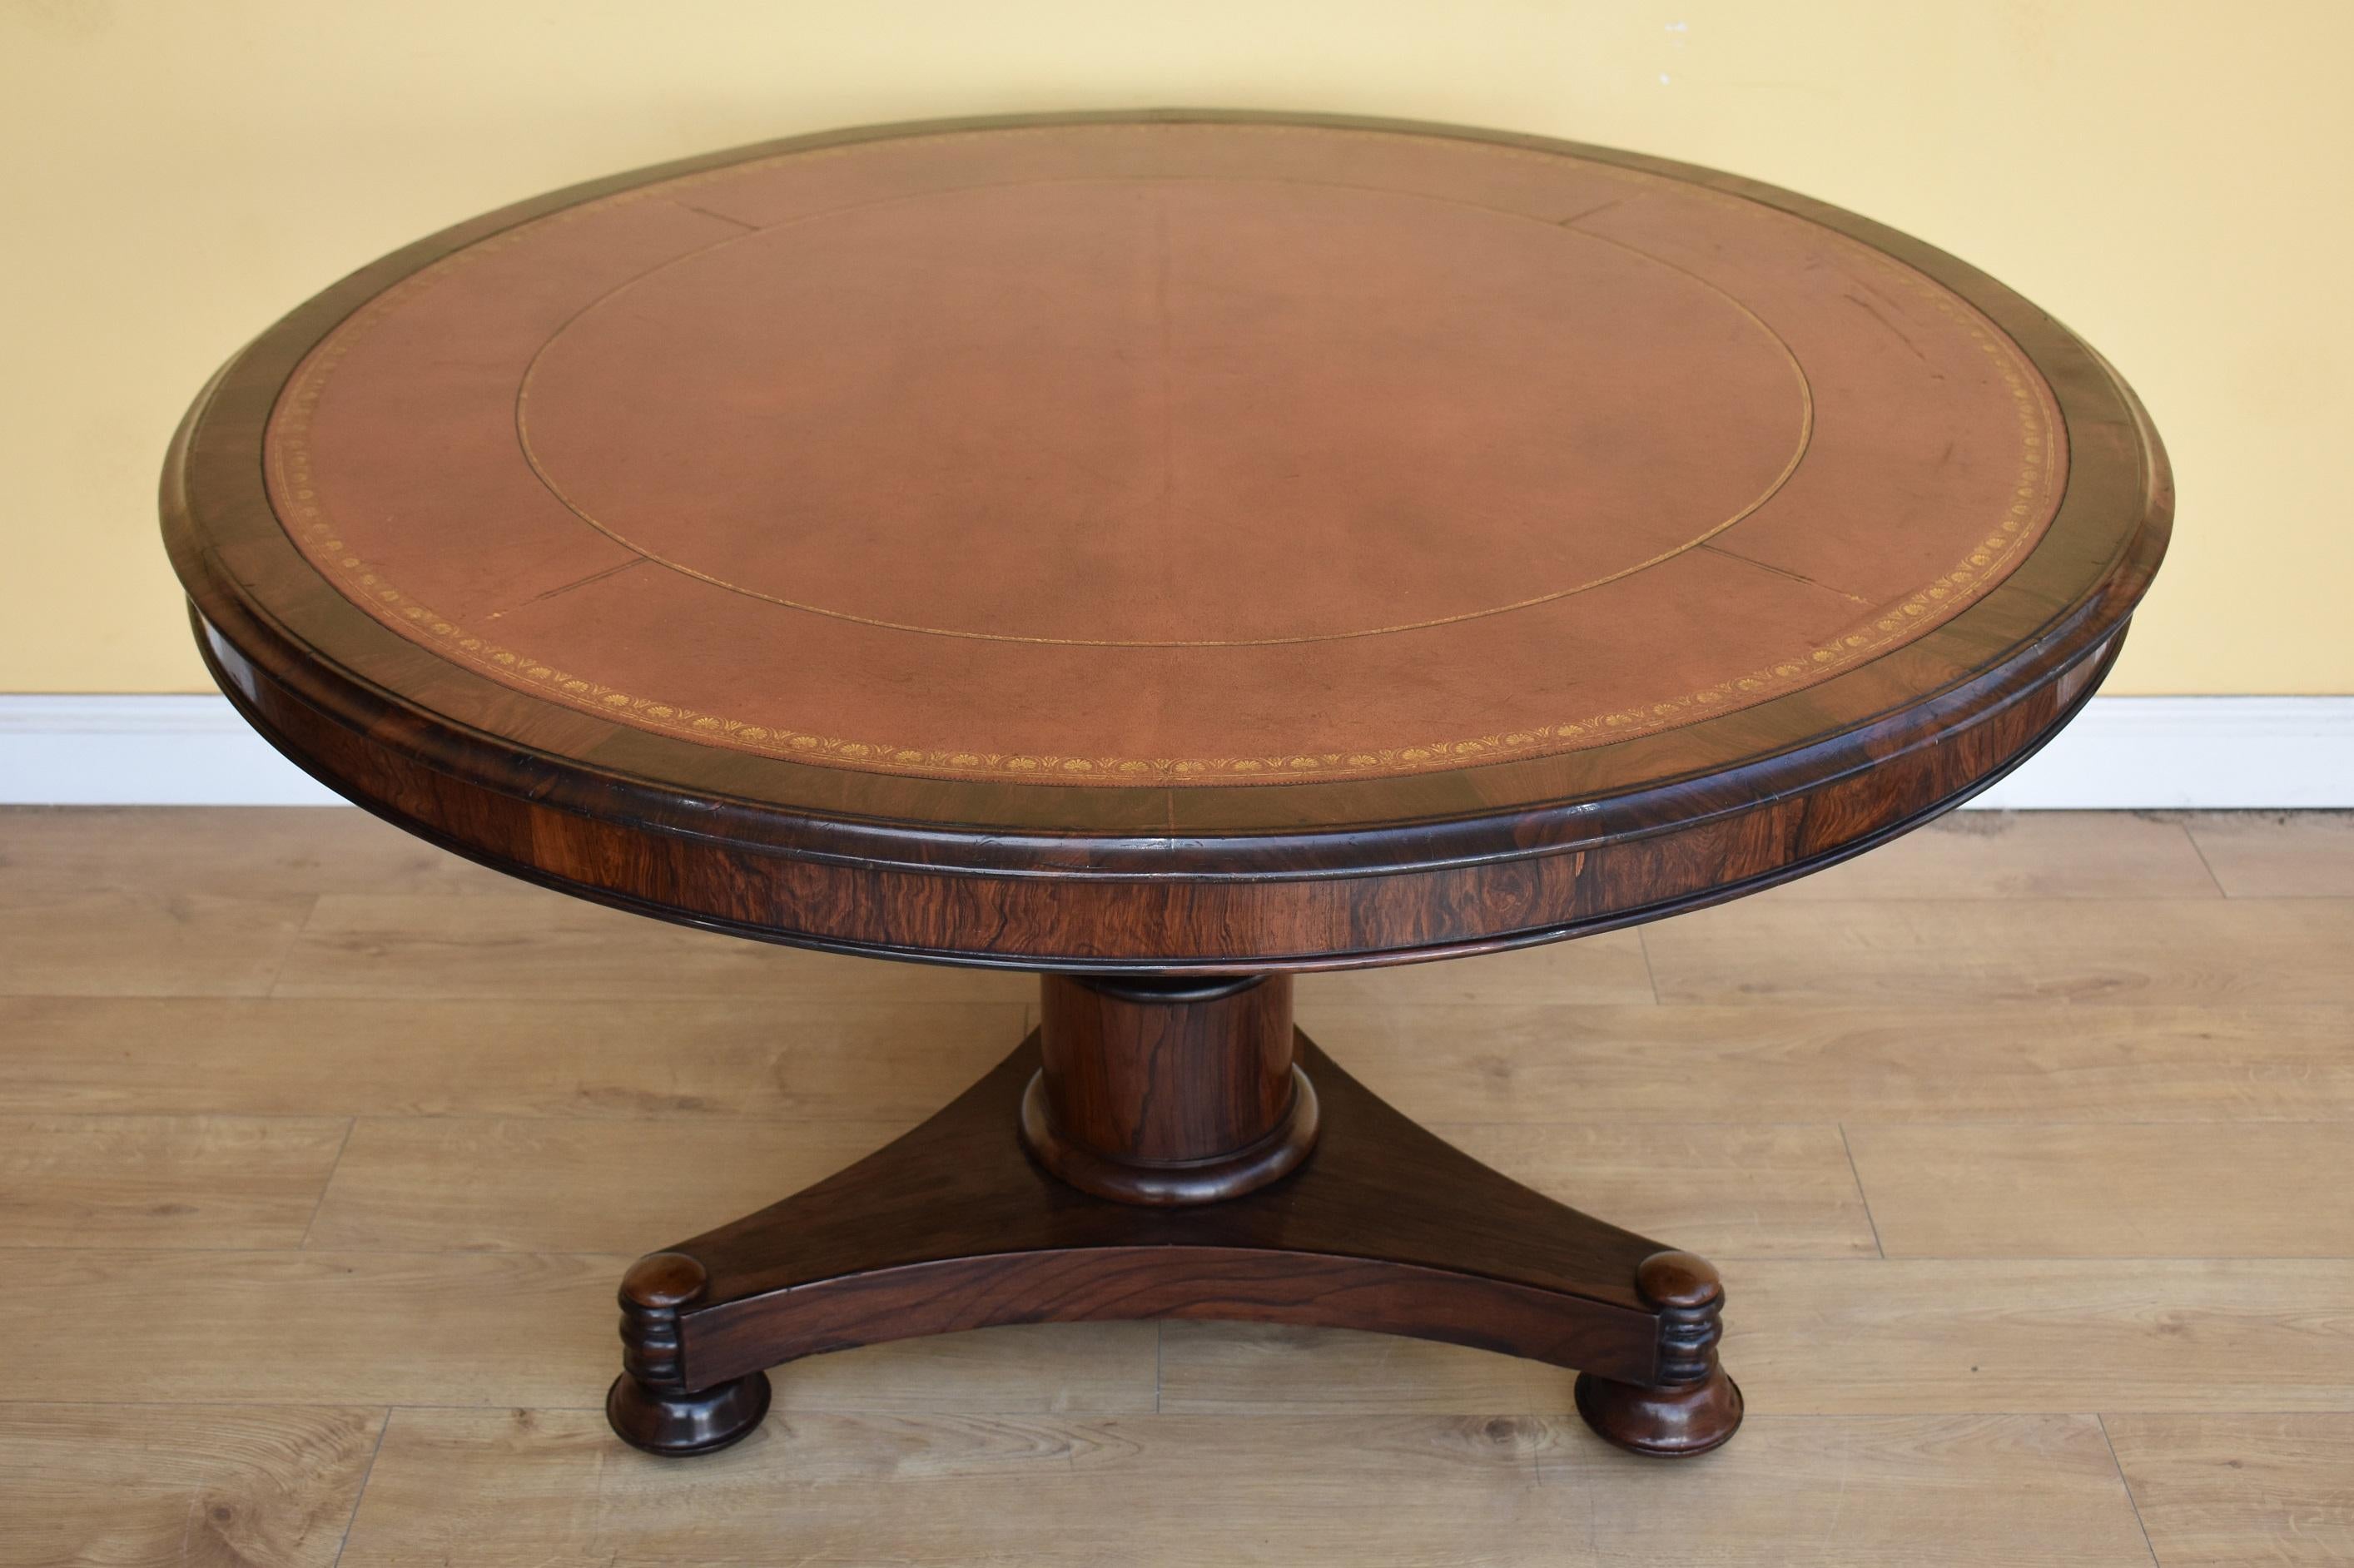 For sale is a Victorian burr walnut Davenport, the top having a rising lid, opening to reveal a fitted interior for stationary storage. Below this, the writing surface also lifts to reveal ample storage space. The Davenport has one paneled side, and